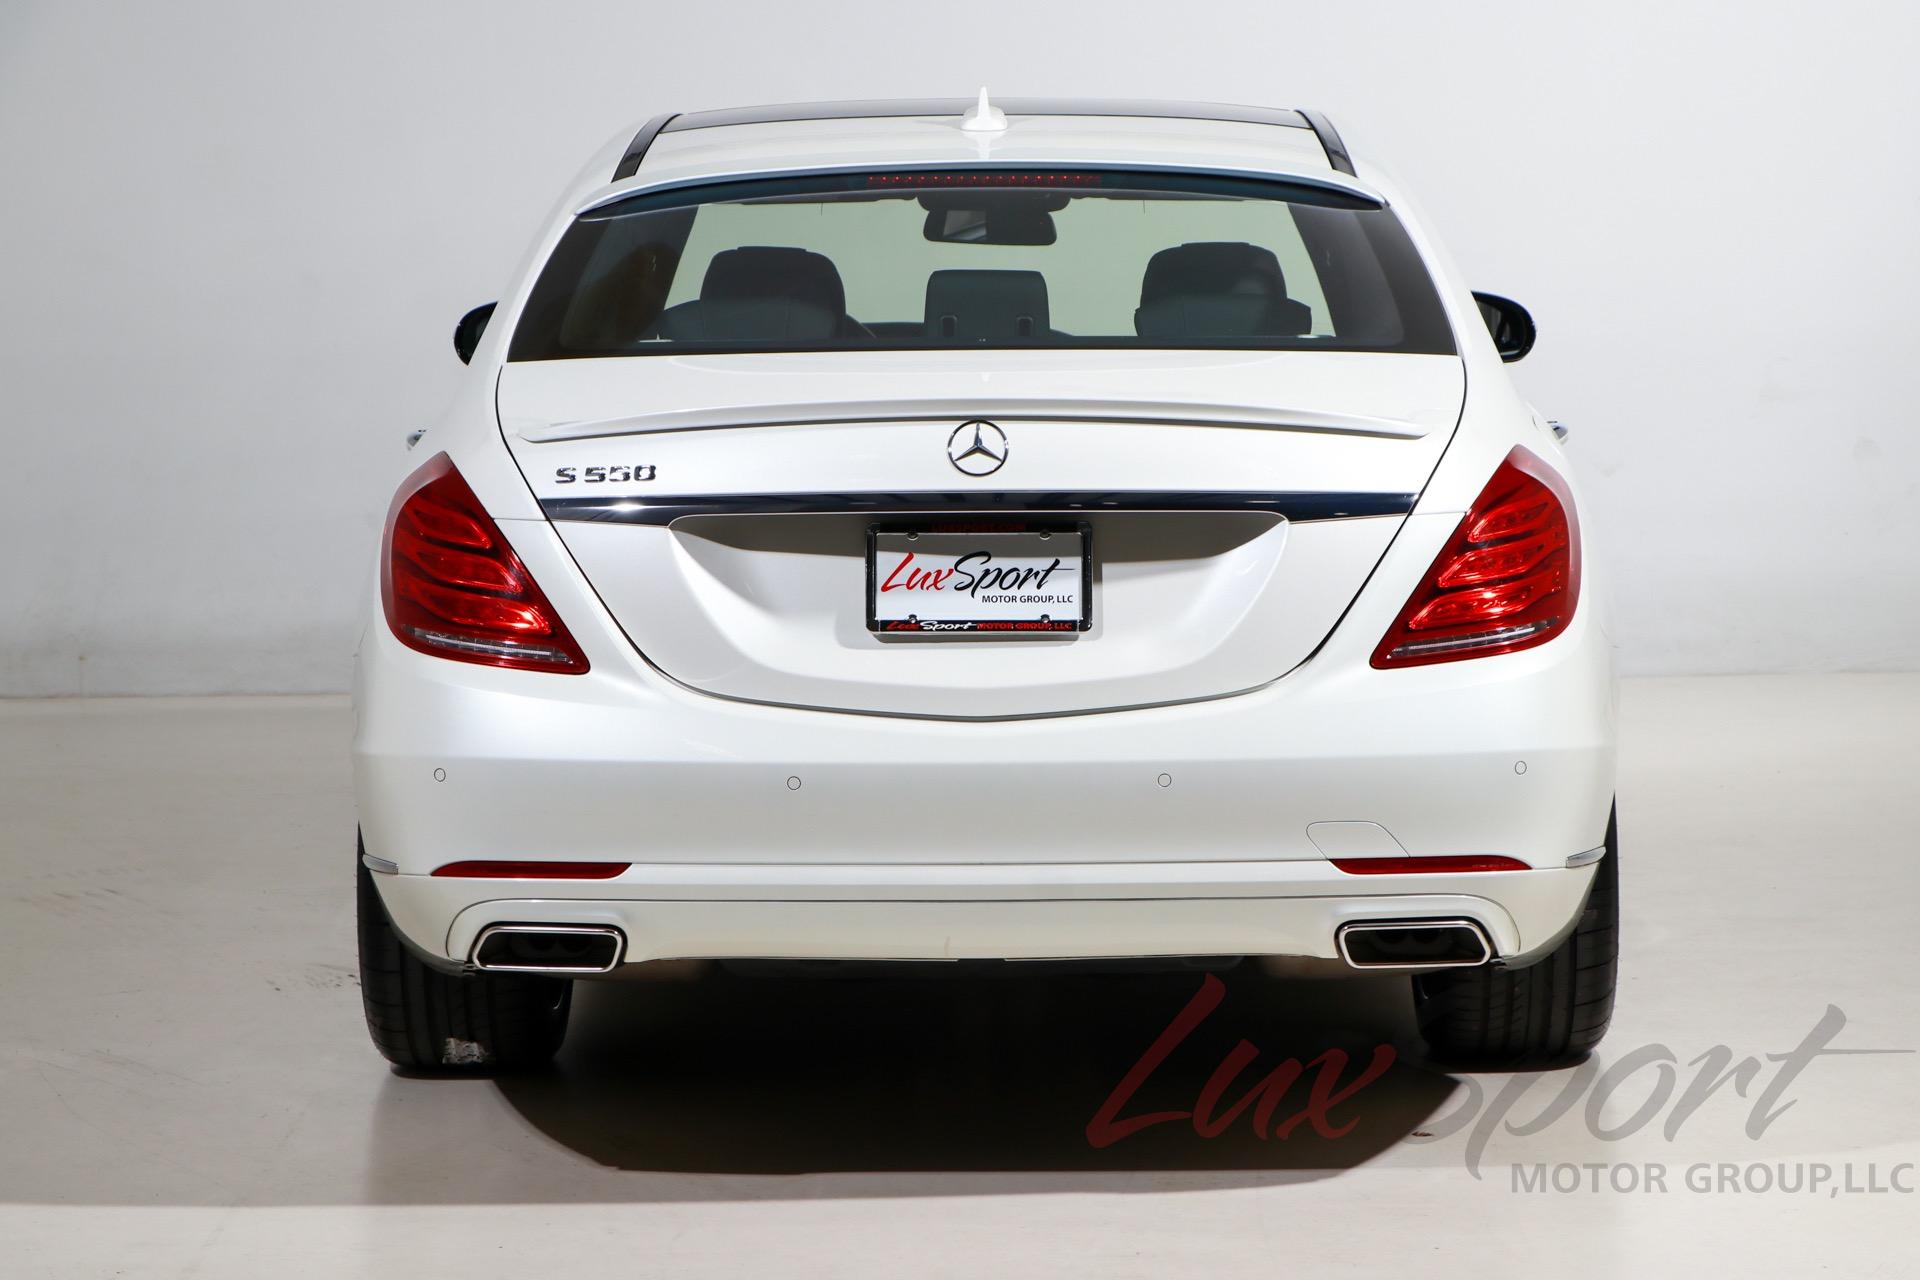 Used 2014 Mercedes-Benz S-Class S 550 | Plainview, NY